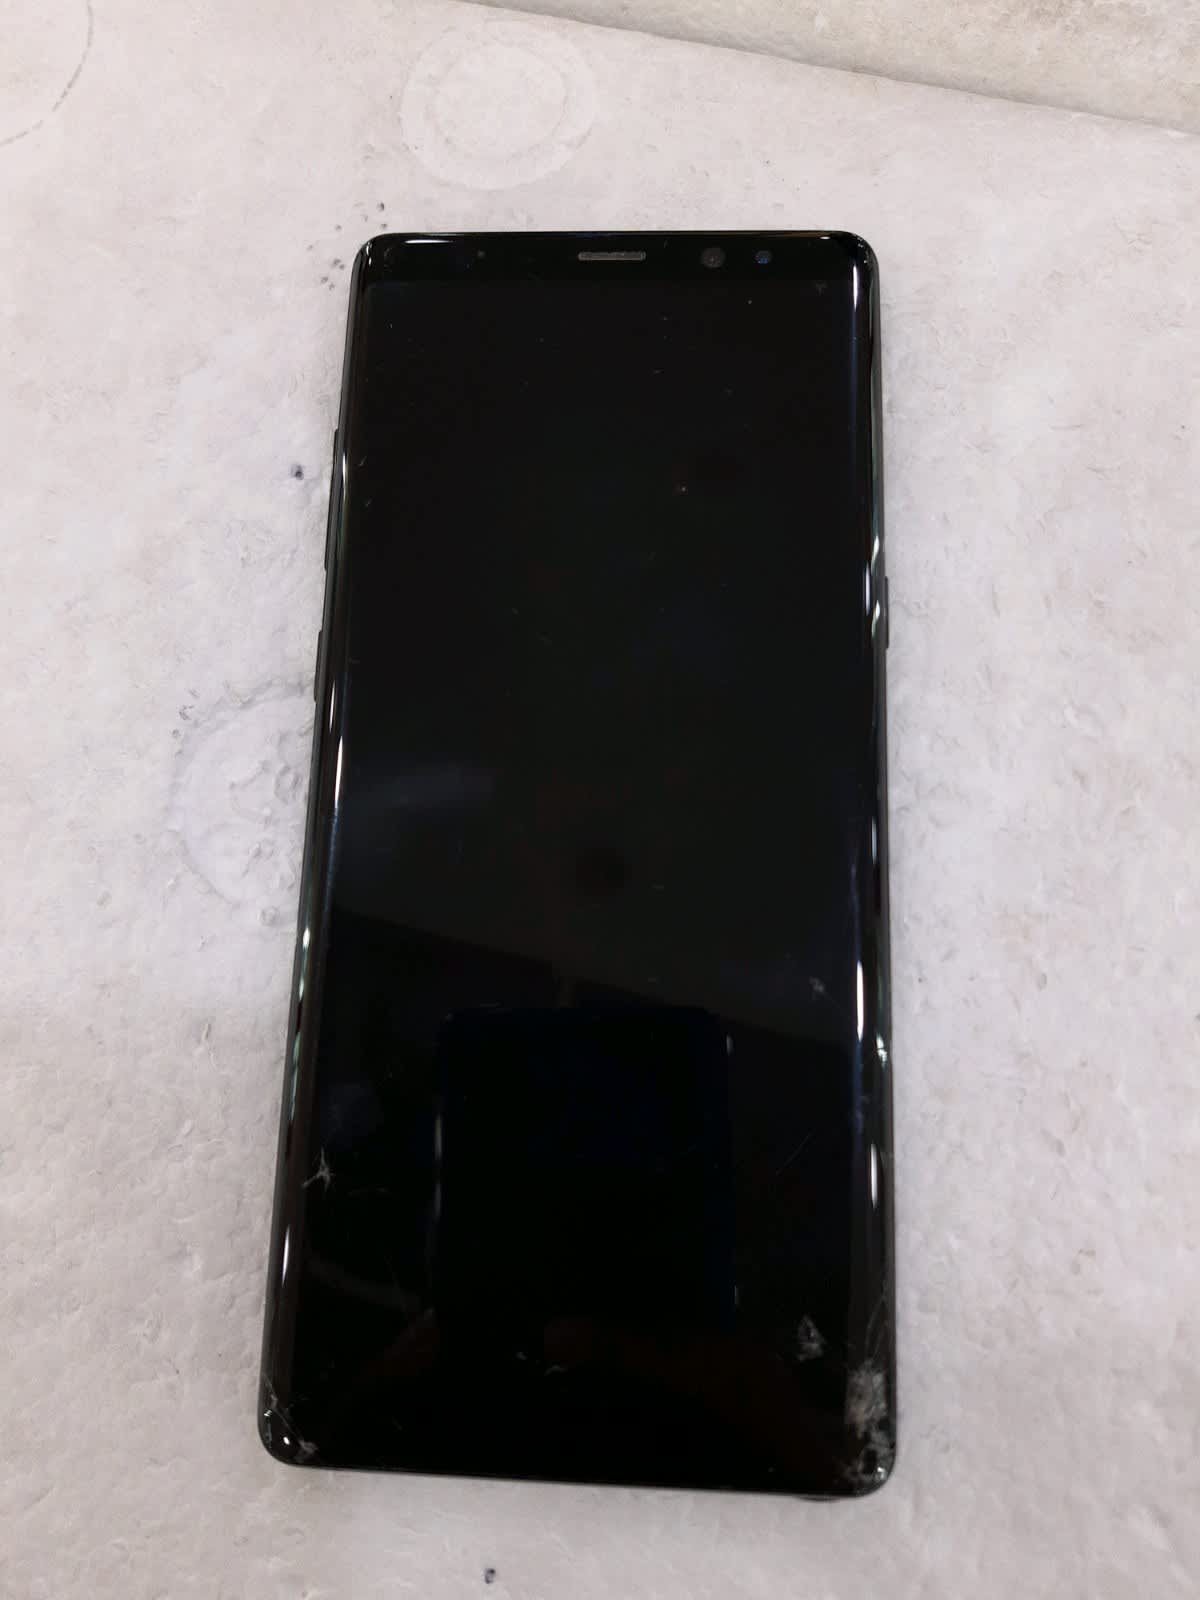 Black Samsung Note 8 64Gb with Working condition | Android